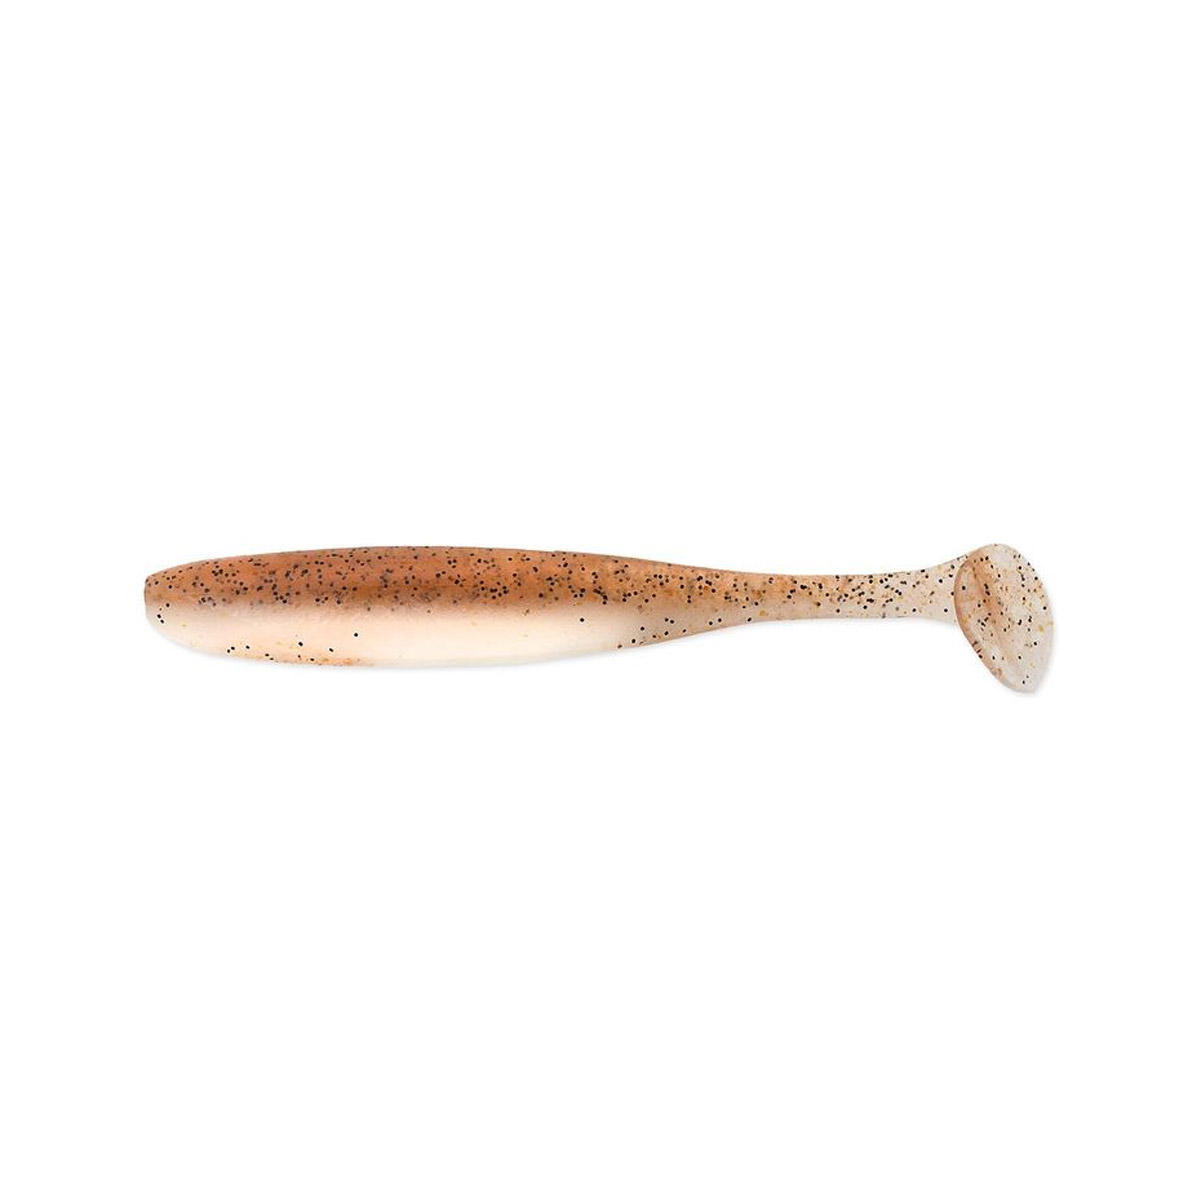 Keitech Easy Shiner 3 inch -  Natural Craw